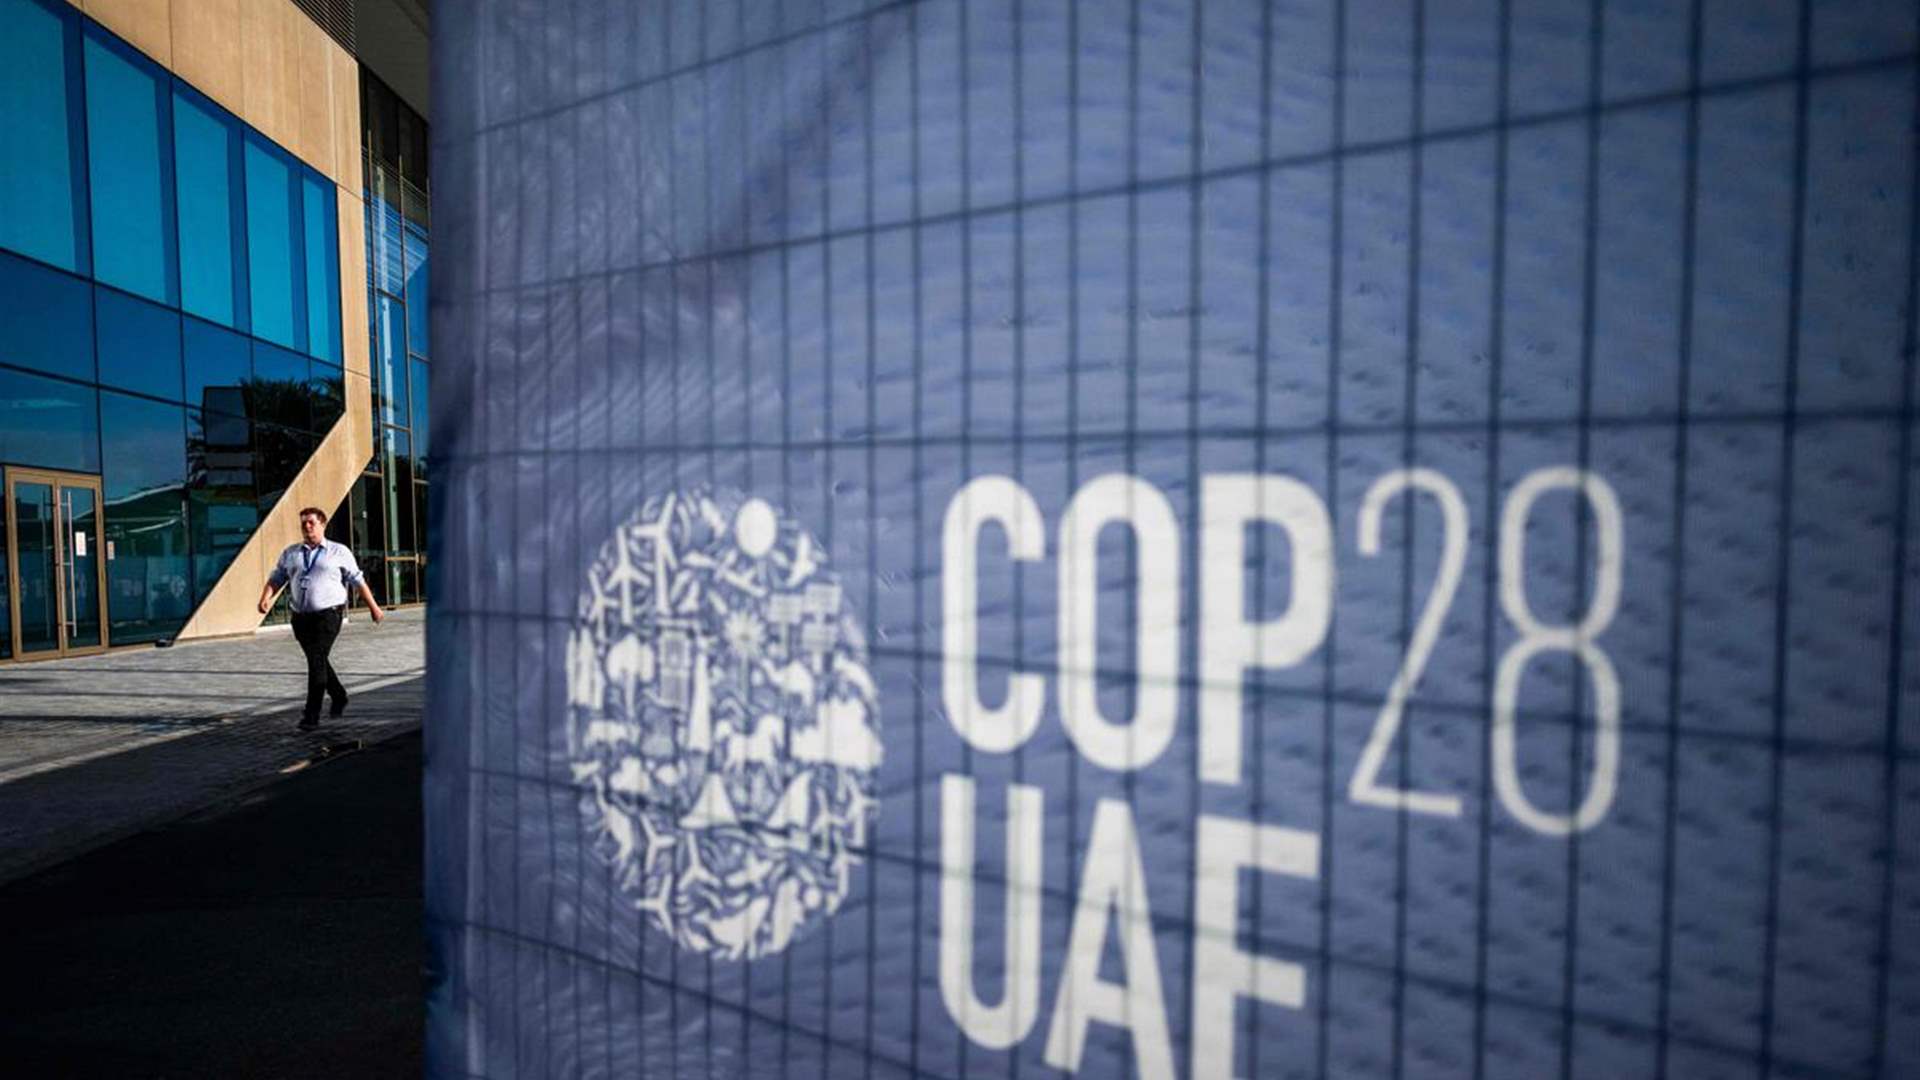 Iranian delegation withdraws from the COP28 conference in protest against Israel&#39;s participation